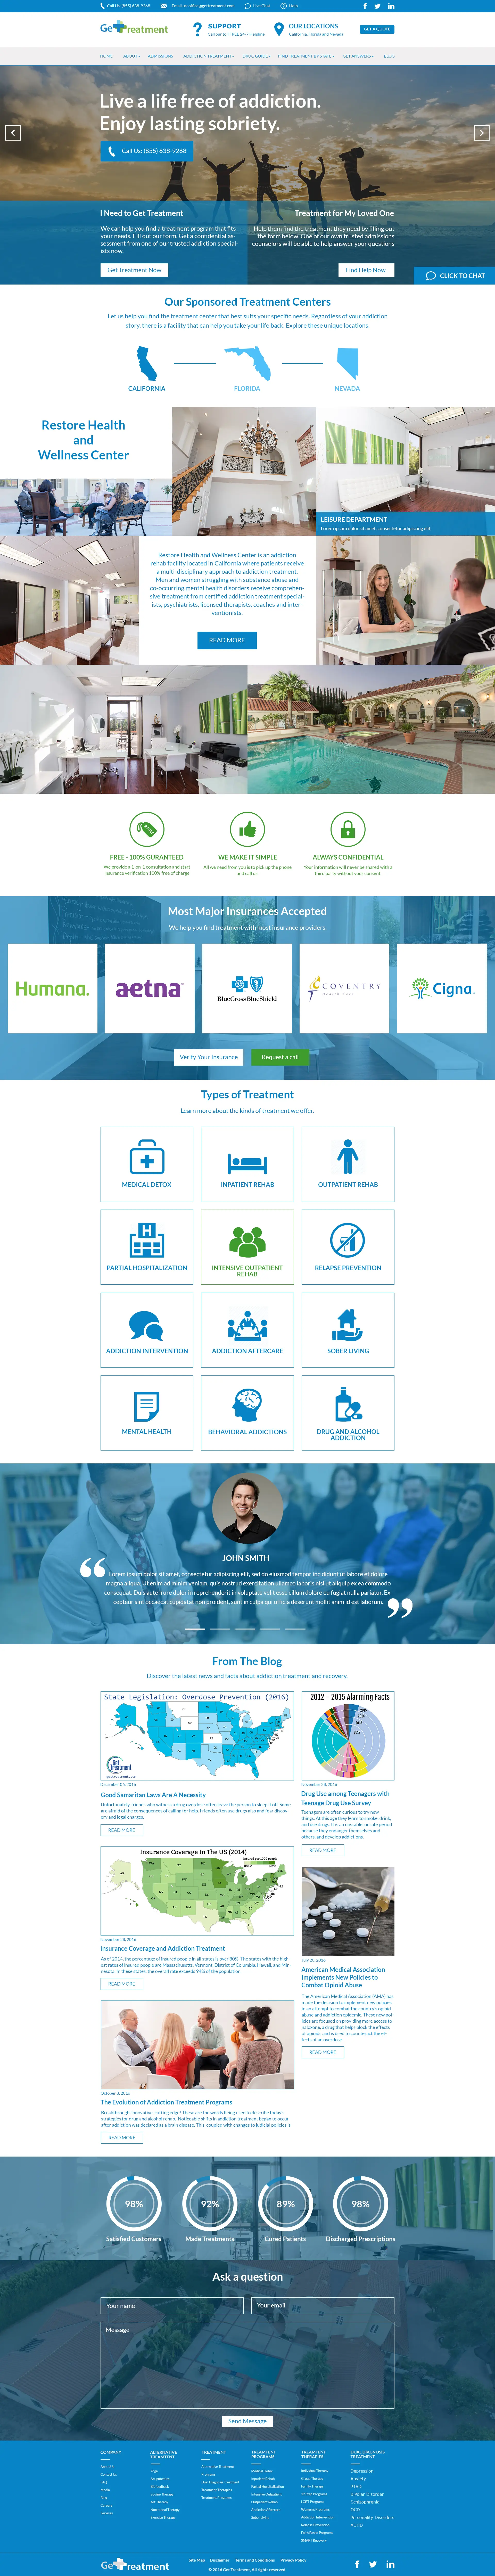 Get-Treatment-Homepage-bootstrap3-1170px.jpg